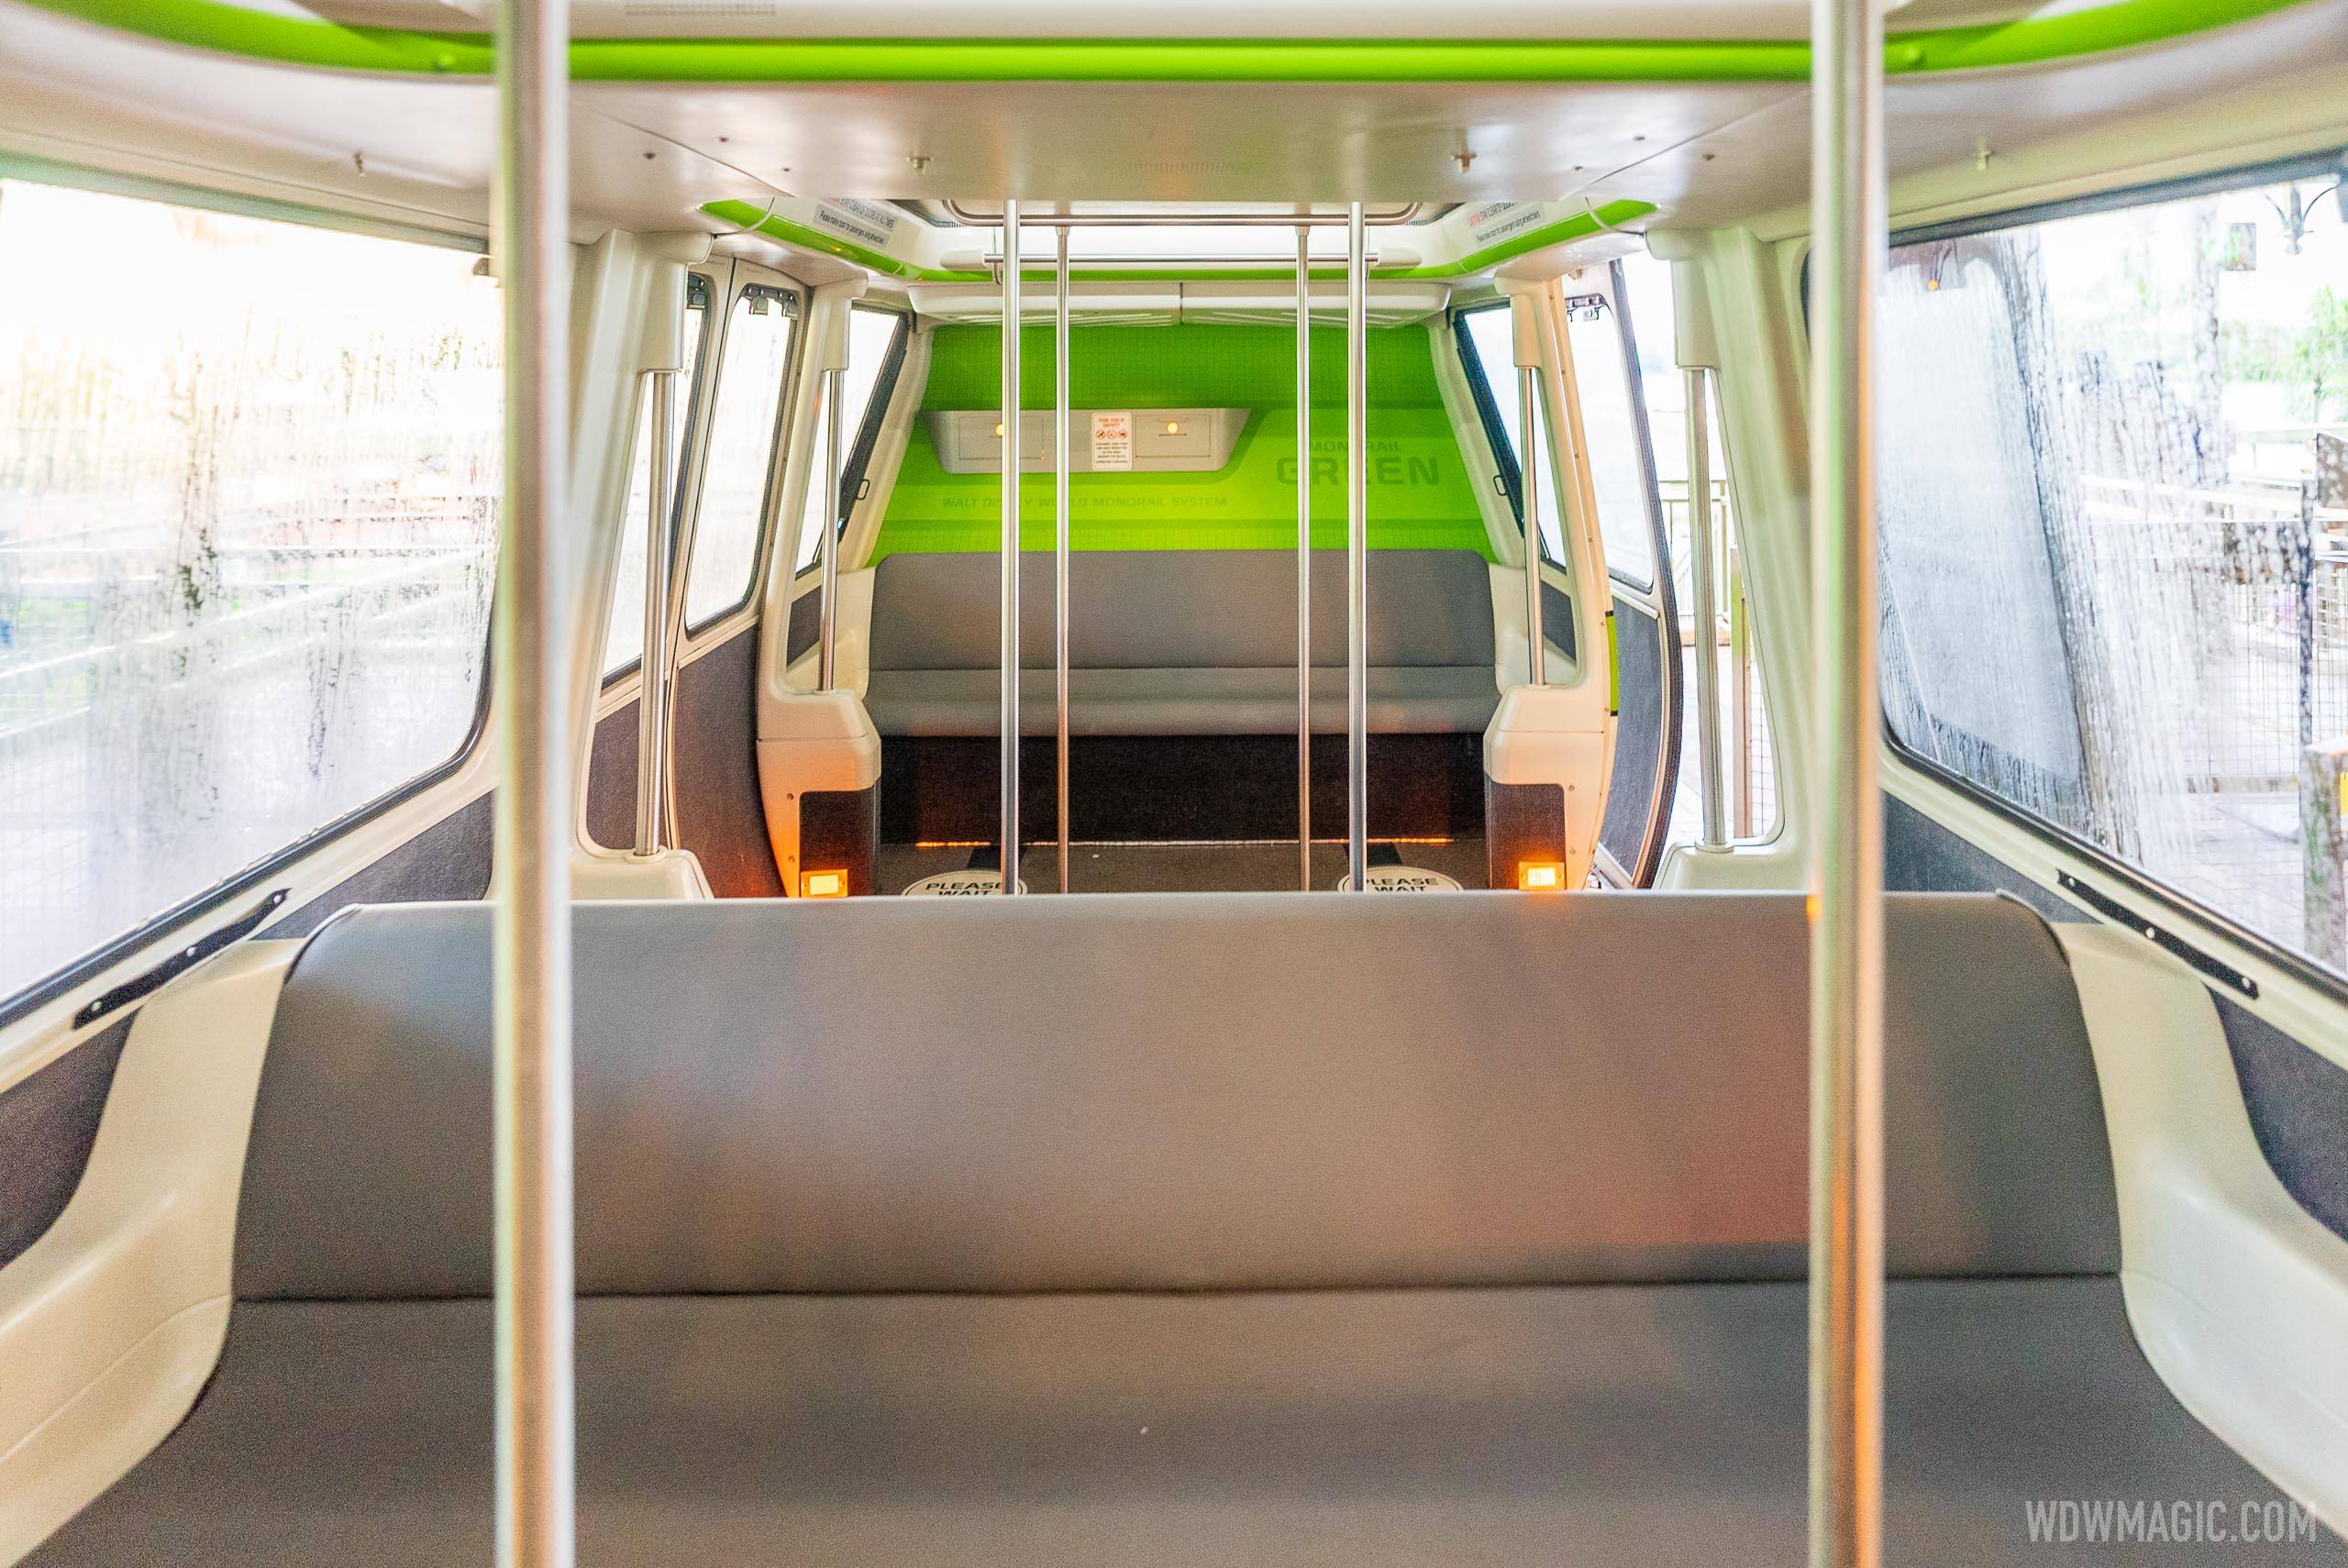 On the Disney World monorails, plexiglass dividers have been removed